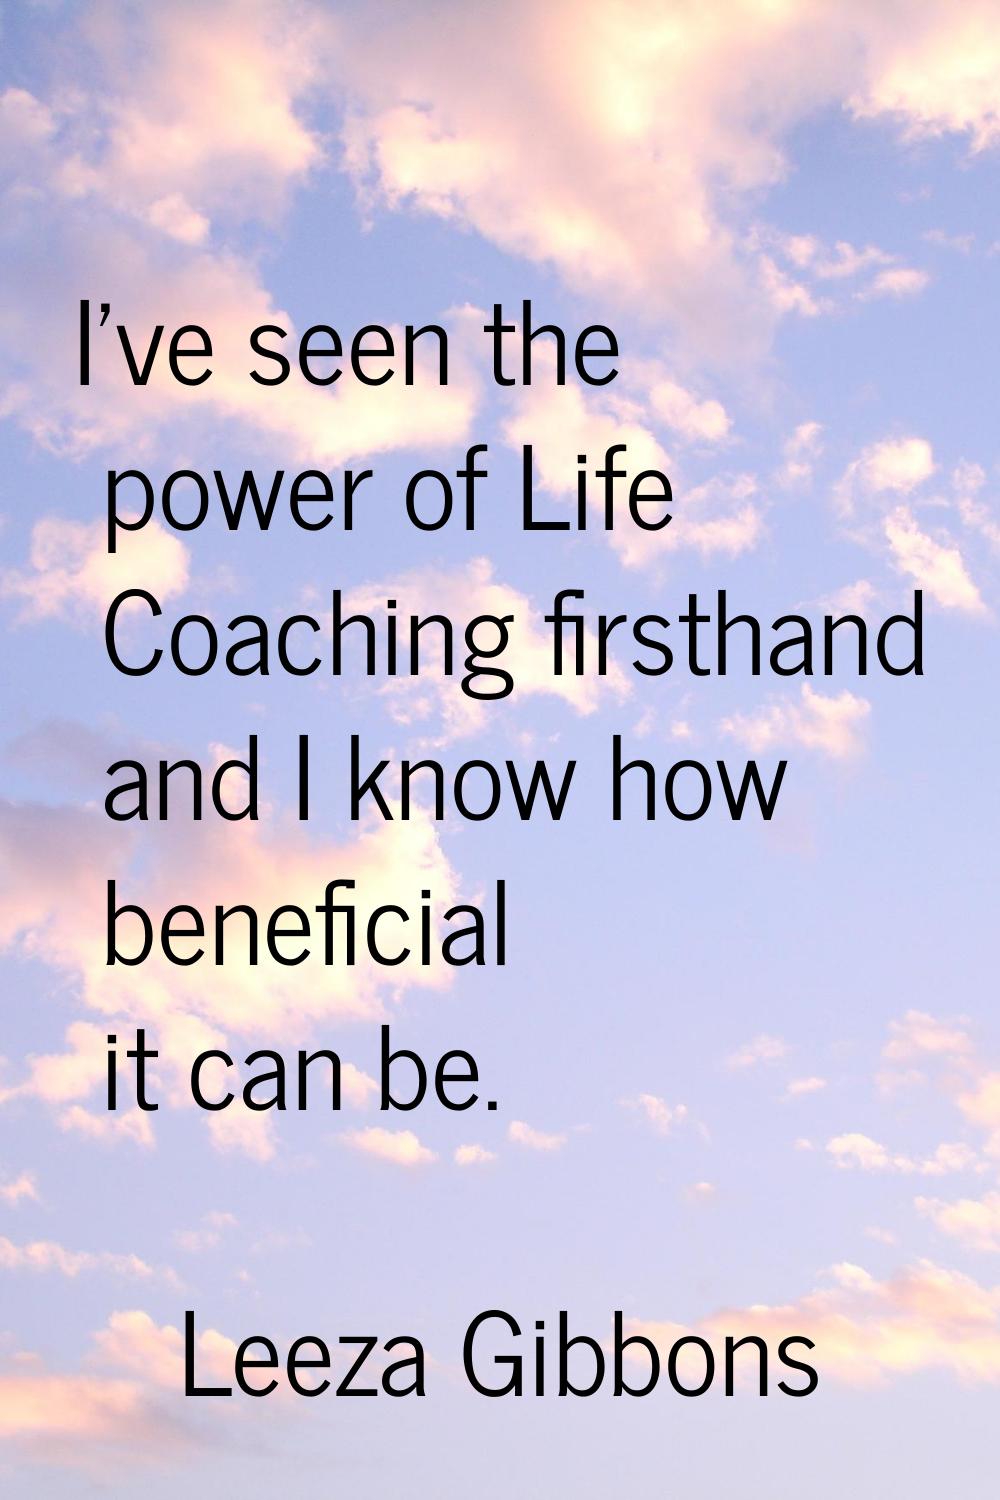 I've seen the power of Life Coaching firsthand and I know how beneficial it can be.